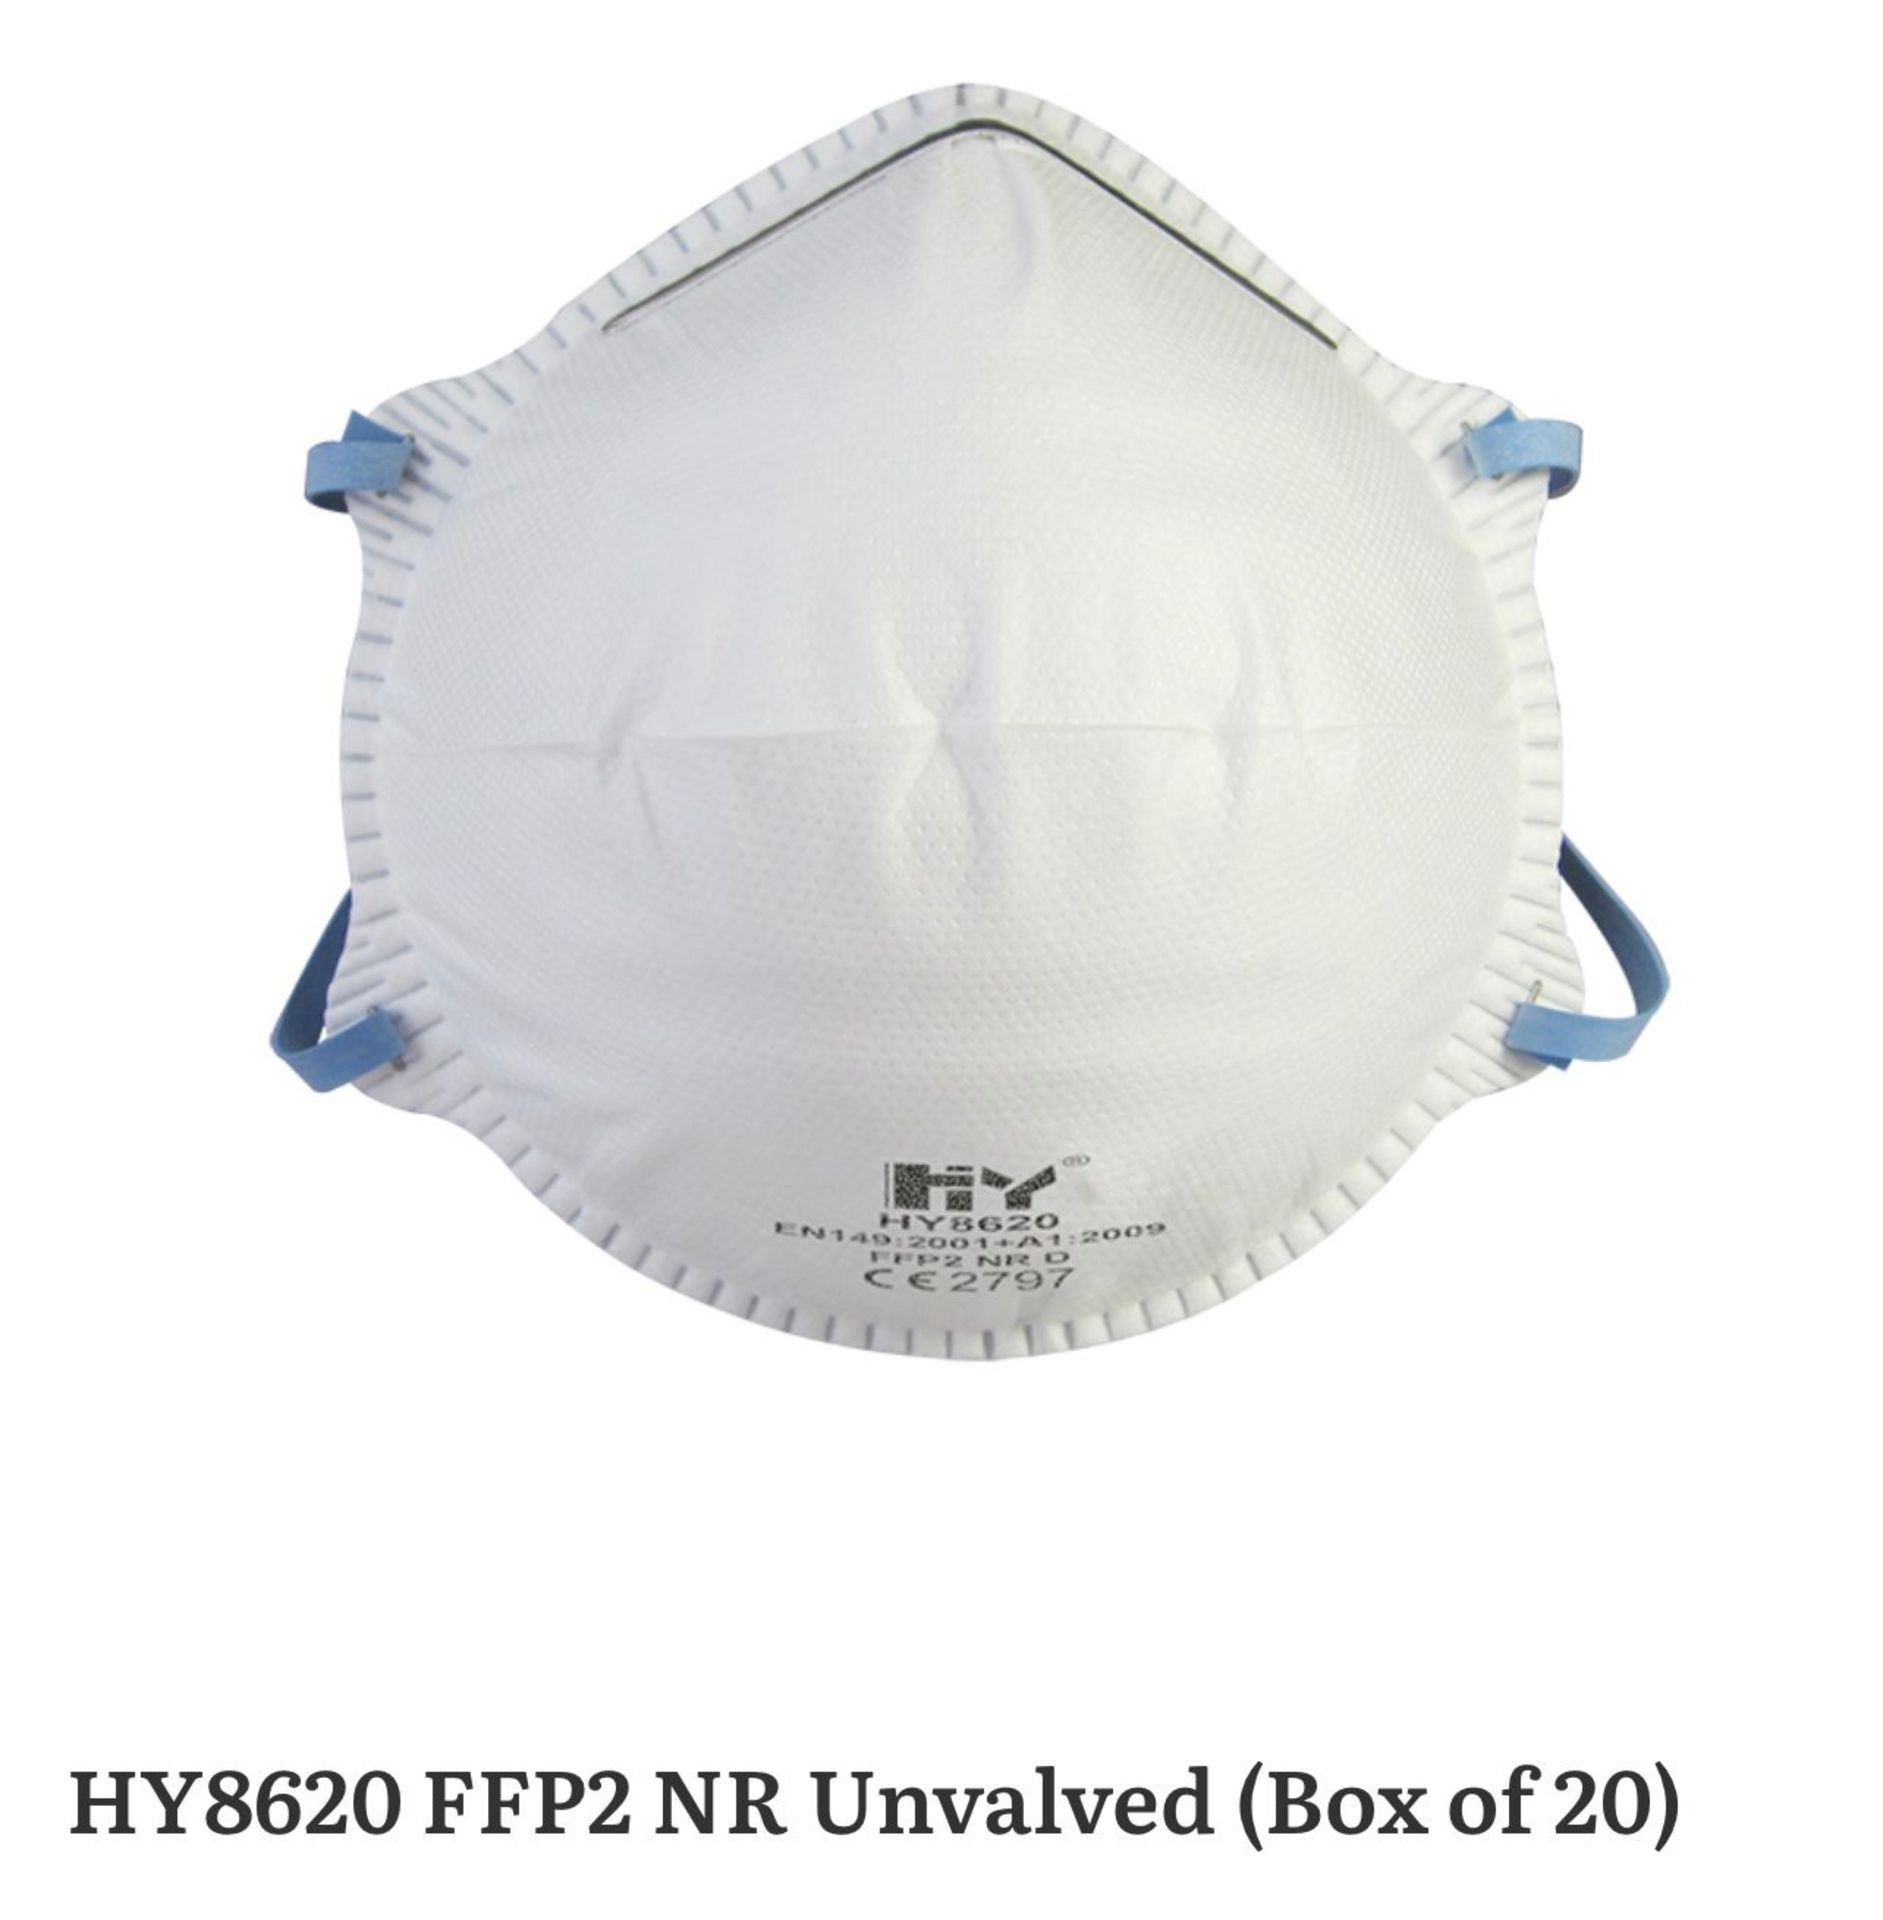 480 BOXES OF HANDANHY HY8620 FFP2 DUST PROTECTION FACE MASKS WORKWEAR 20pack - RRP £4.99, EXP 05/25 - Bild 5 aus 5